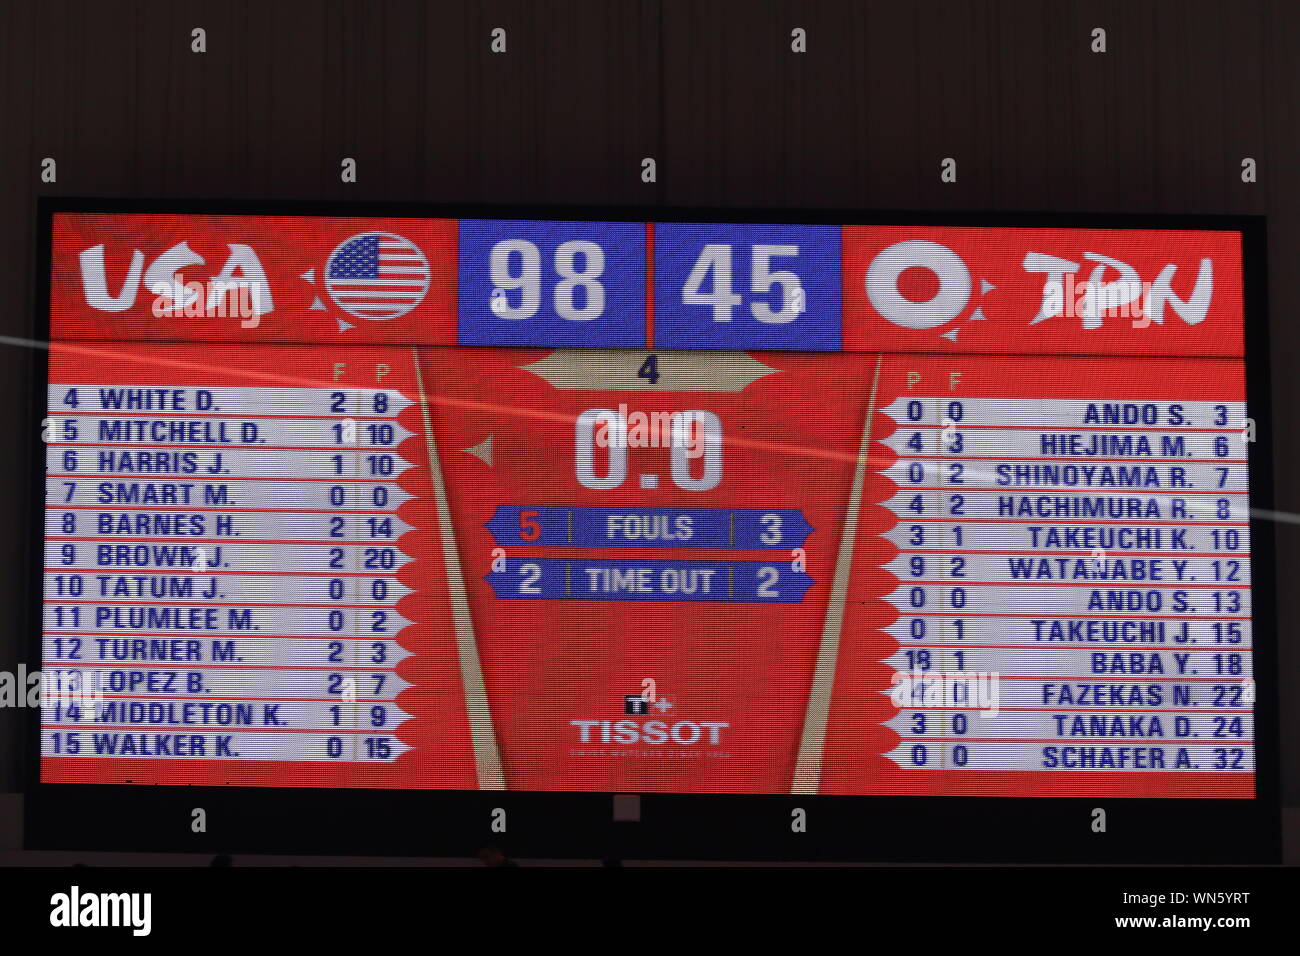 Shanghai, China. 5th Sep, 2019. Final scoreboard during the FIBA Basketball  World Cup China 2019 Group E match between United States 98-45 Japan at  Shanghai Oriental Sports Center in Shanghai, China, September